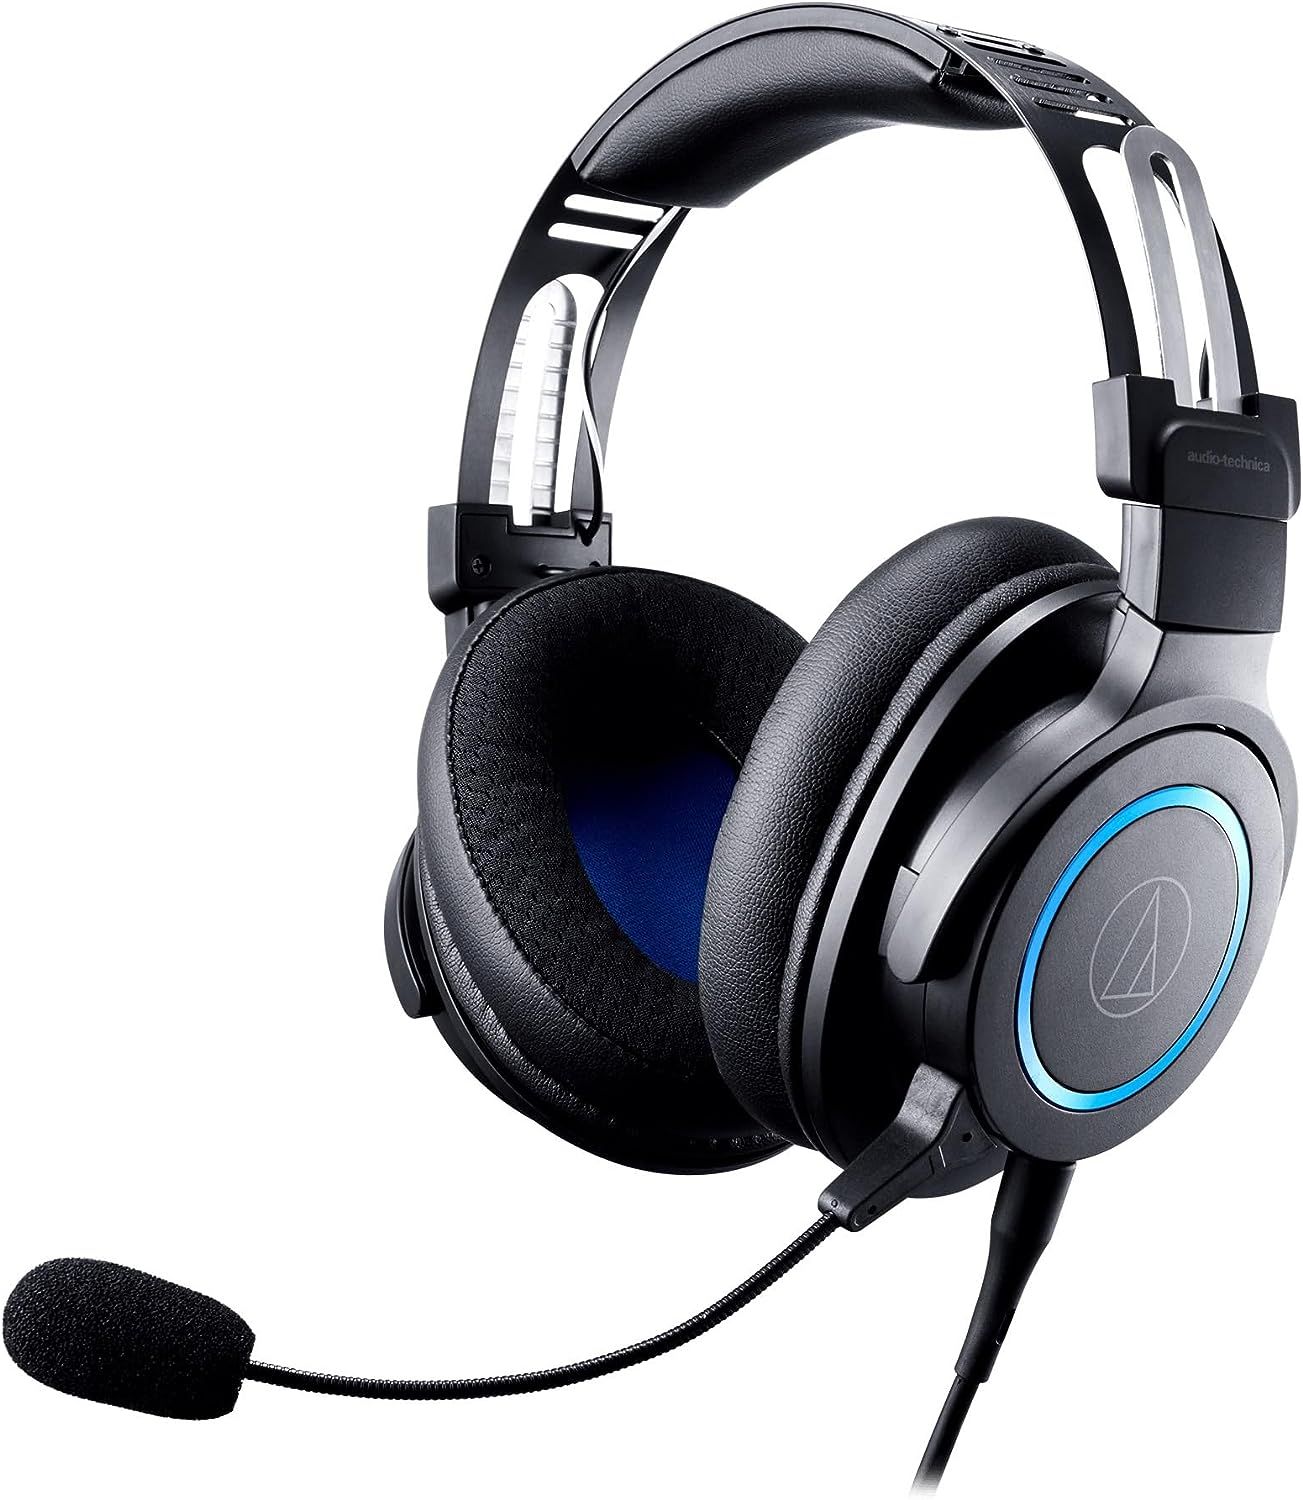 Audio-Technica ATH-G1 gaming headset